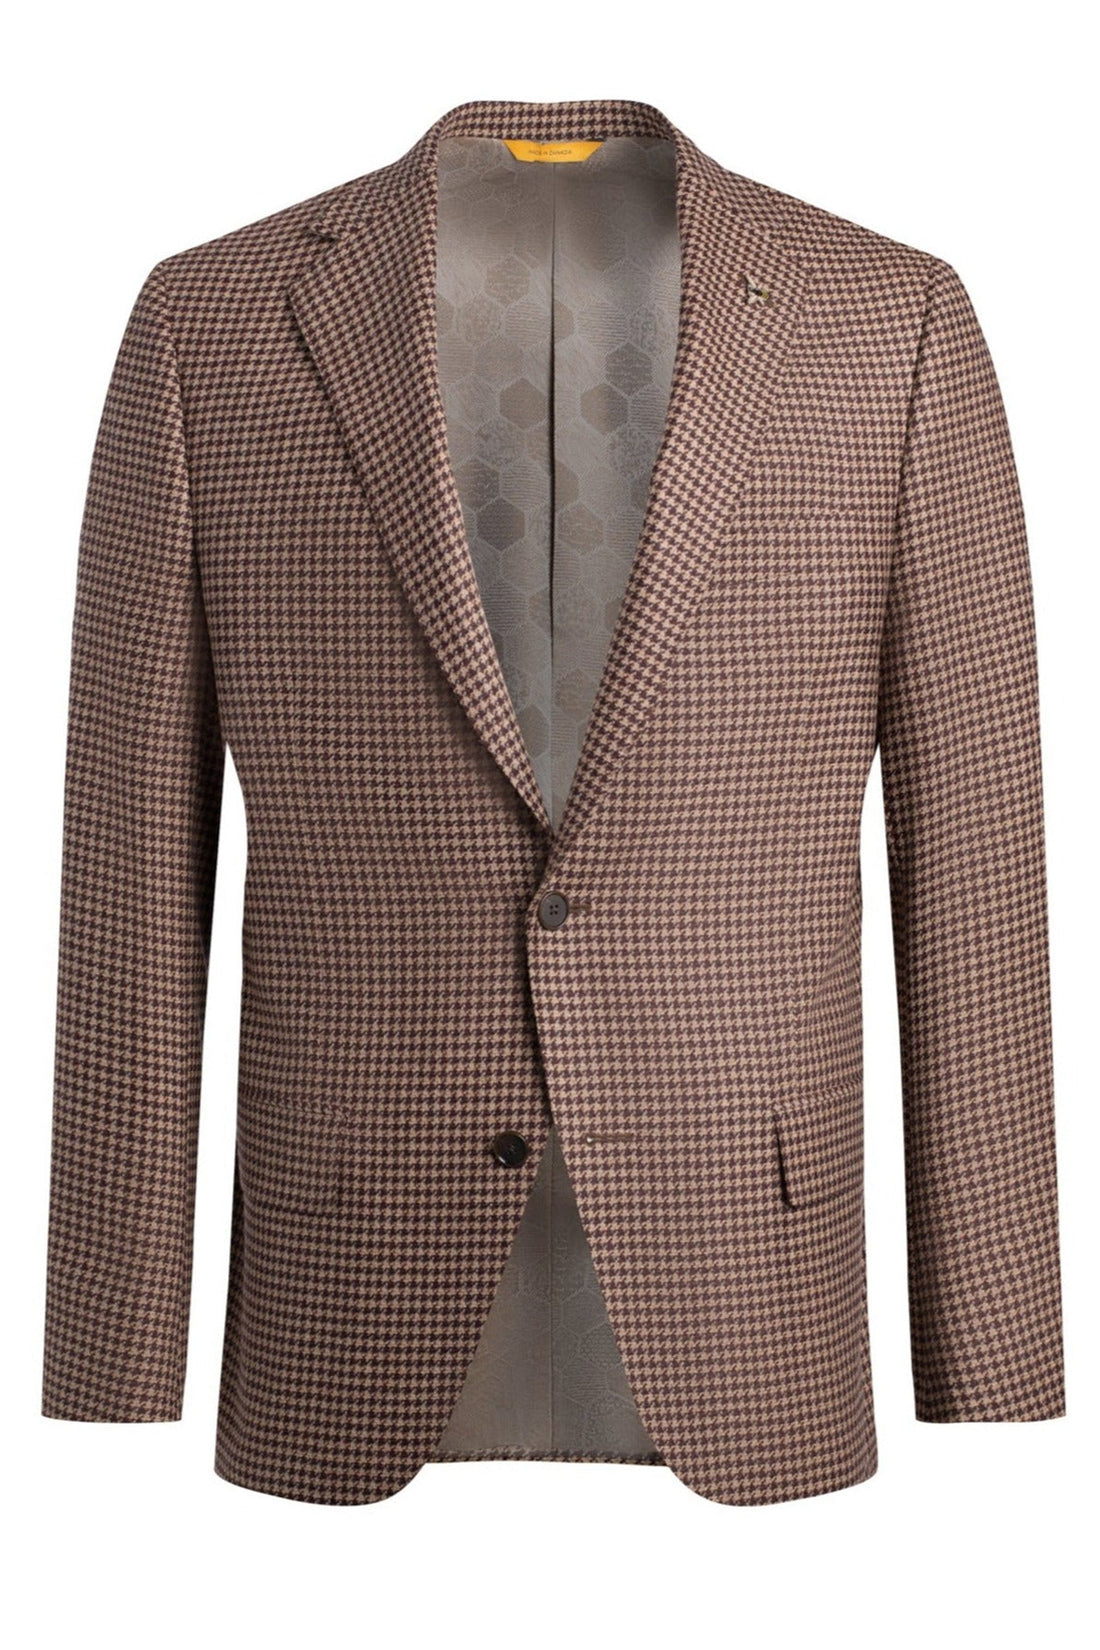 Tan Houndstooth Wool Cashmere Jacket